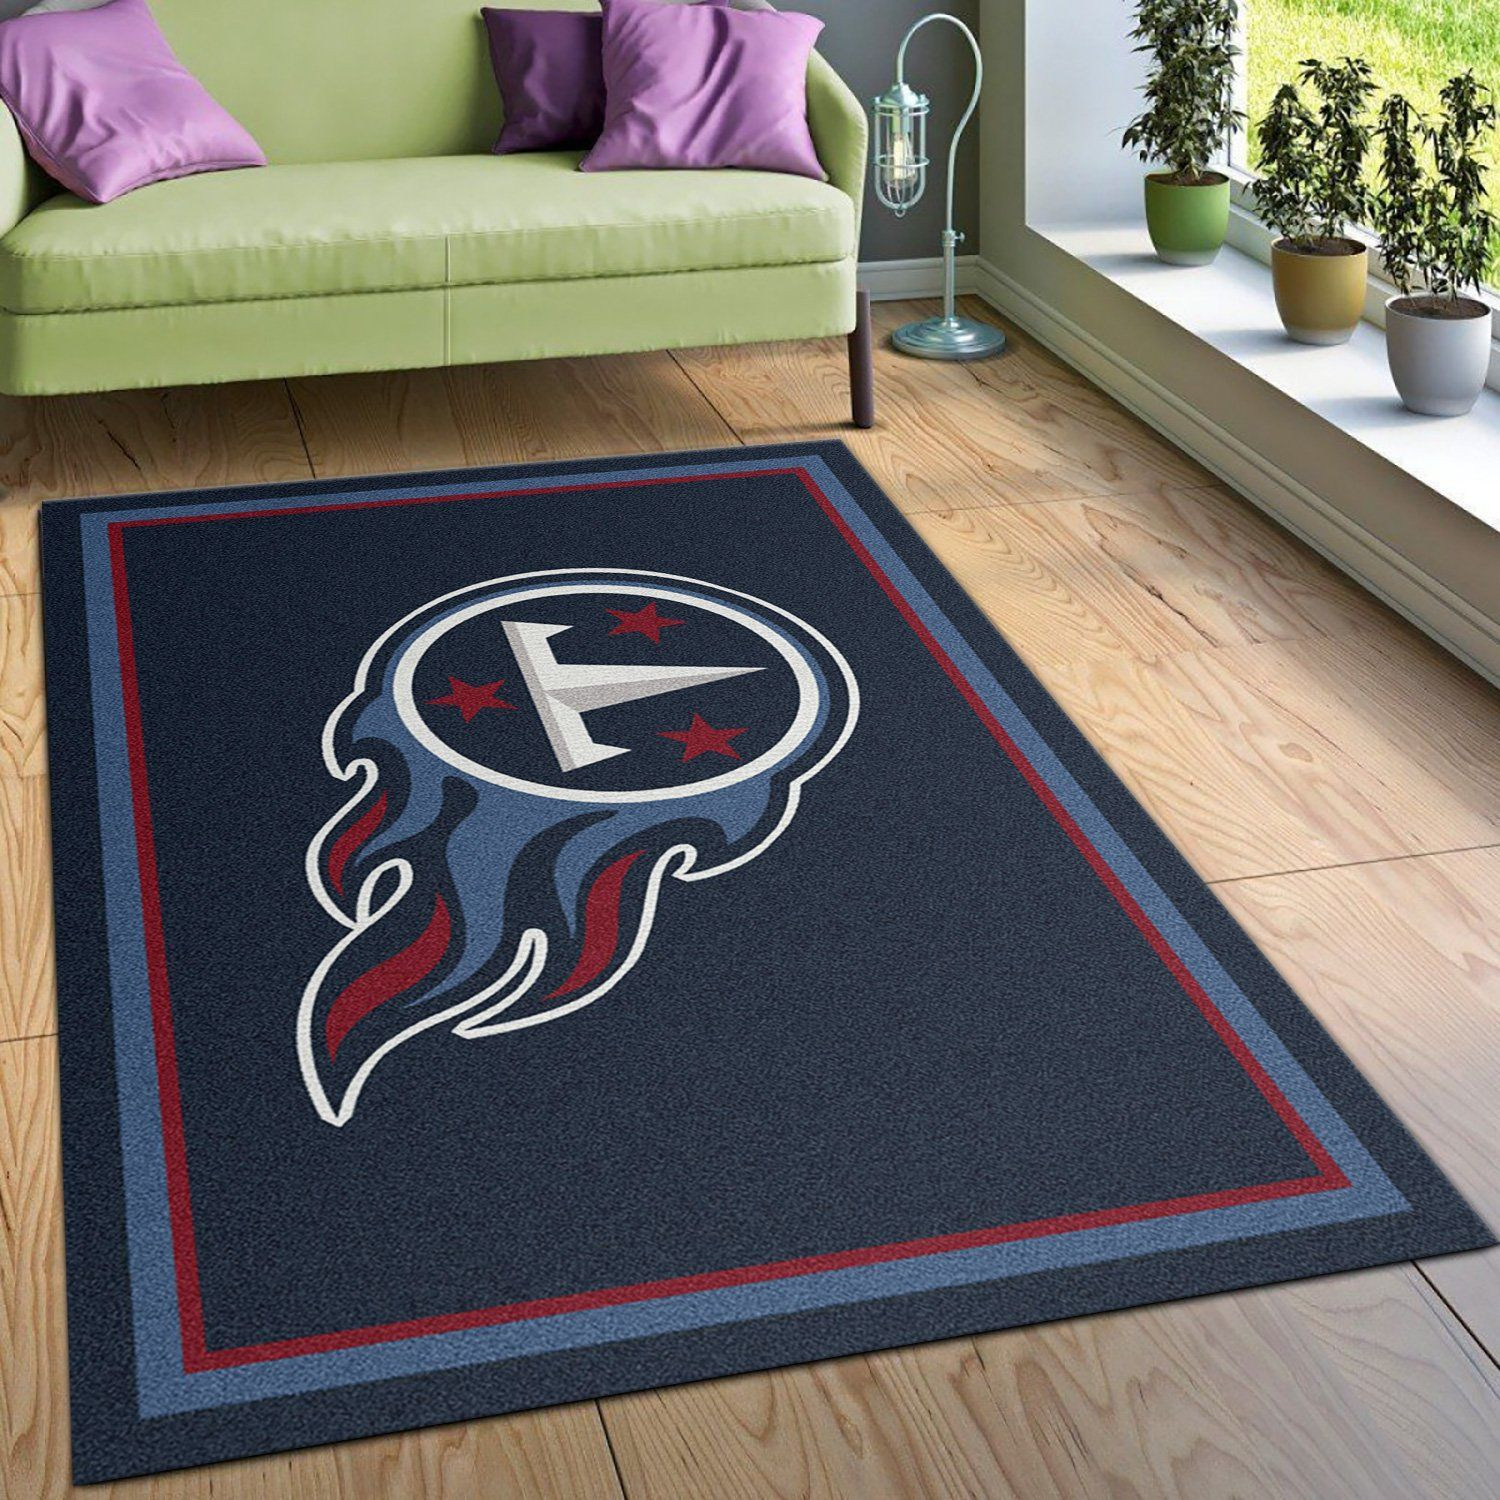 Nfl Spirit Tennessee Titans Area Rug For Christmas, Bedroom Rug, Home US Decor - Indoor Outdoor Rugs 3